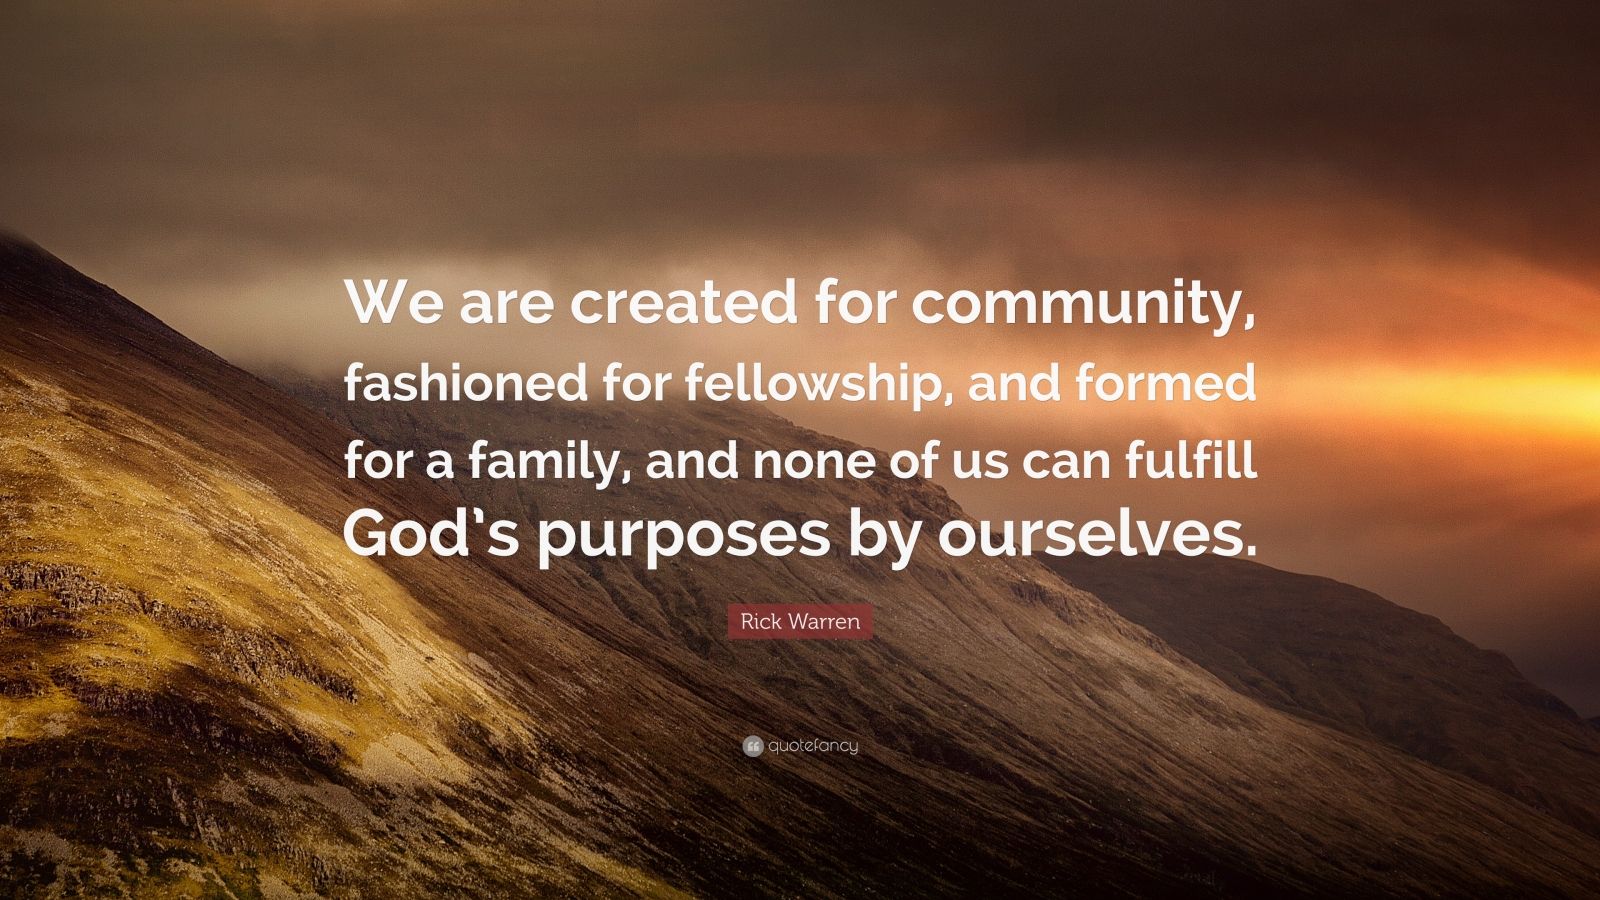 Rick Warren Quote: “We are created for community, fashioned for